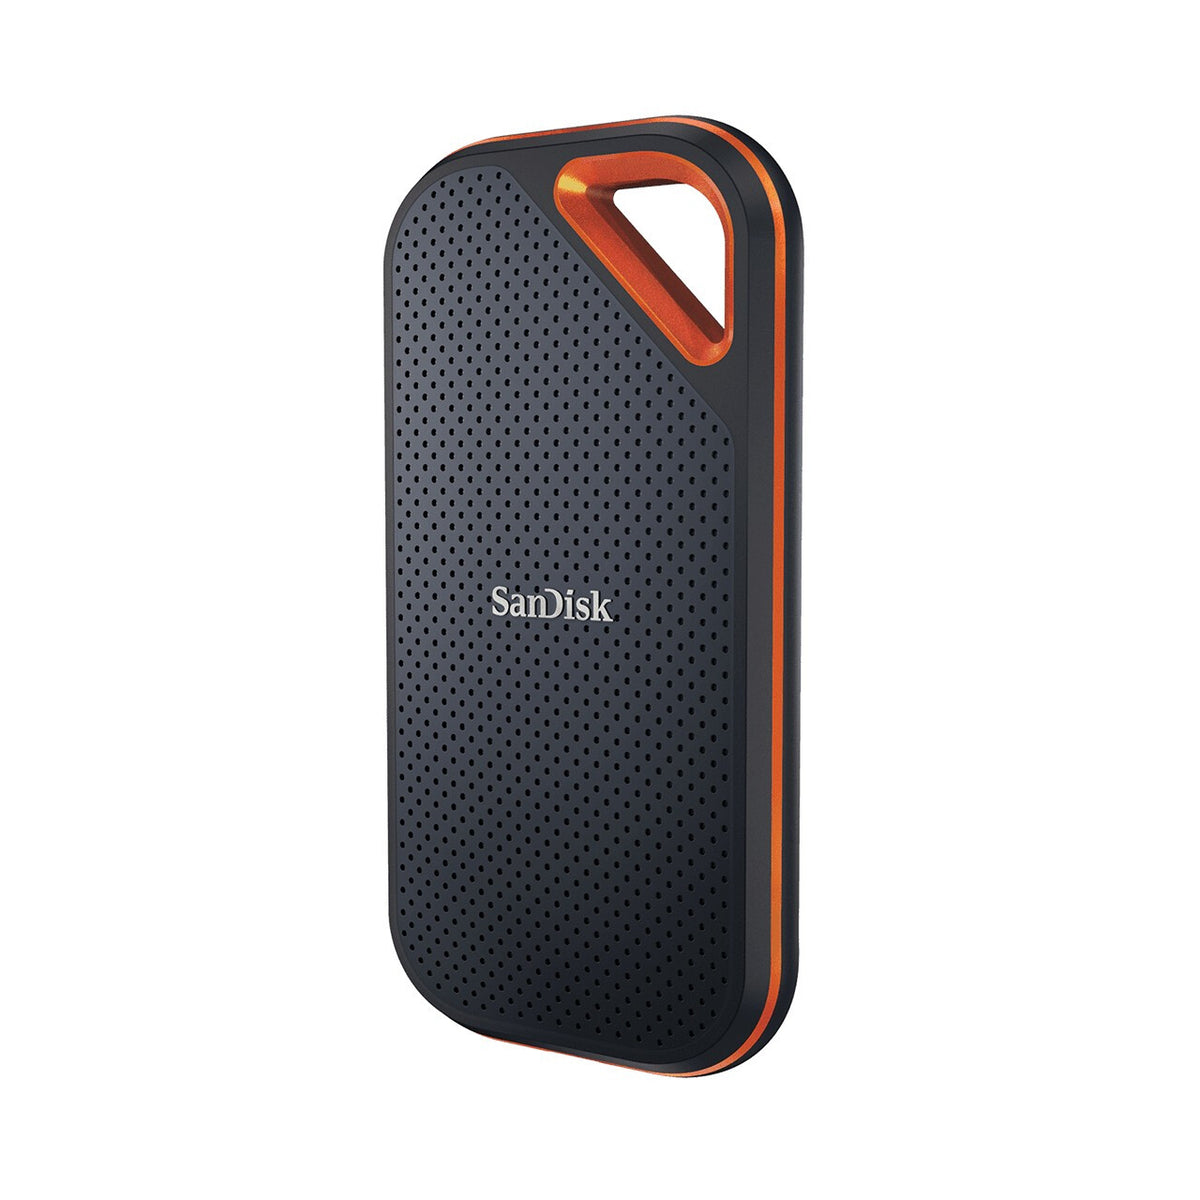 SanDisk Extreme PRO Portable - External solid state drive - 1 TB